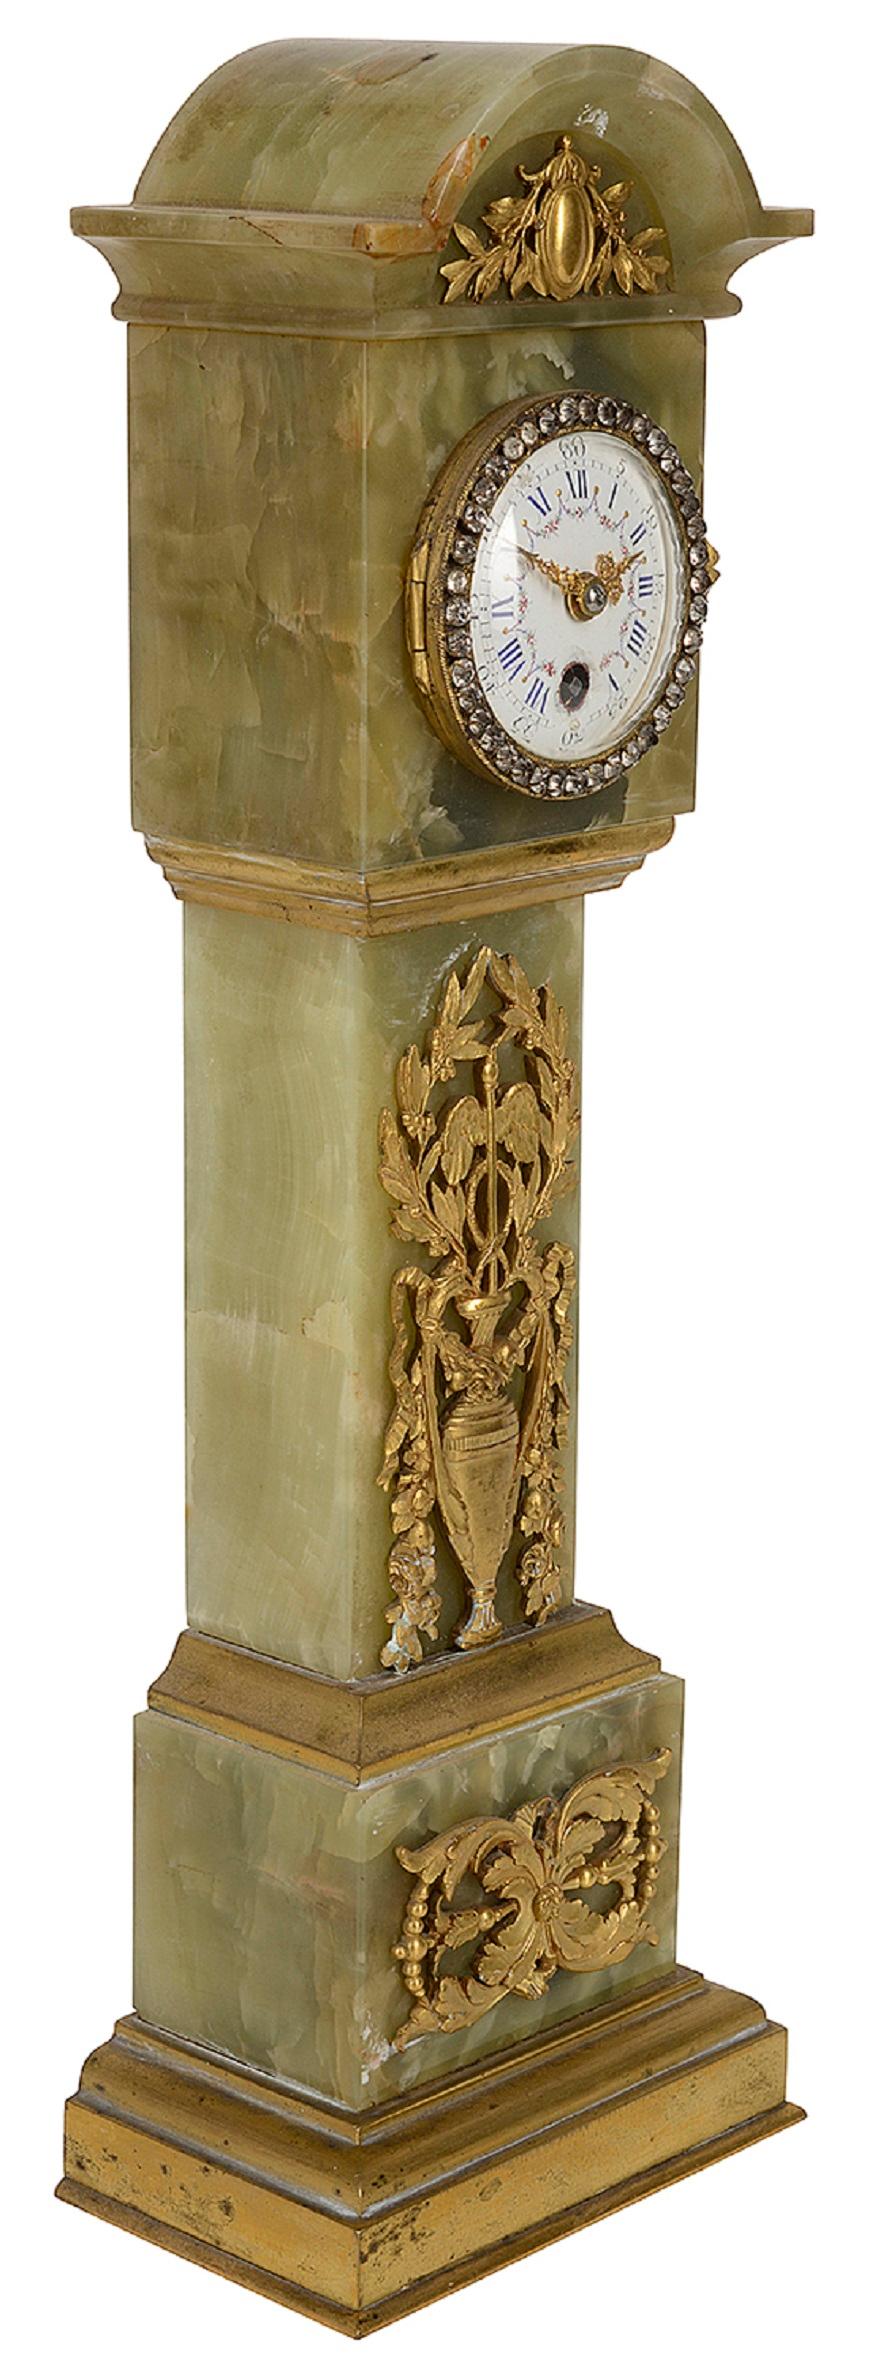 Minature Onyx + Ormolu Table/Mantel Clock, Late 19th Century In Good Condition For Sale In Brighton, Sussex